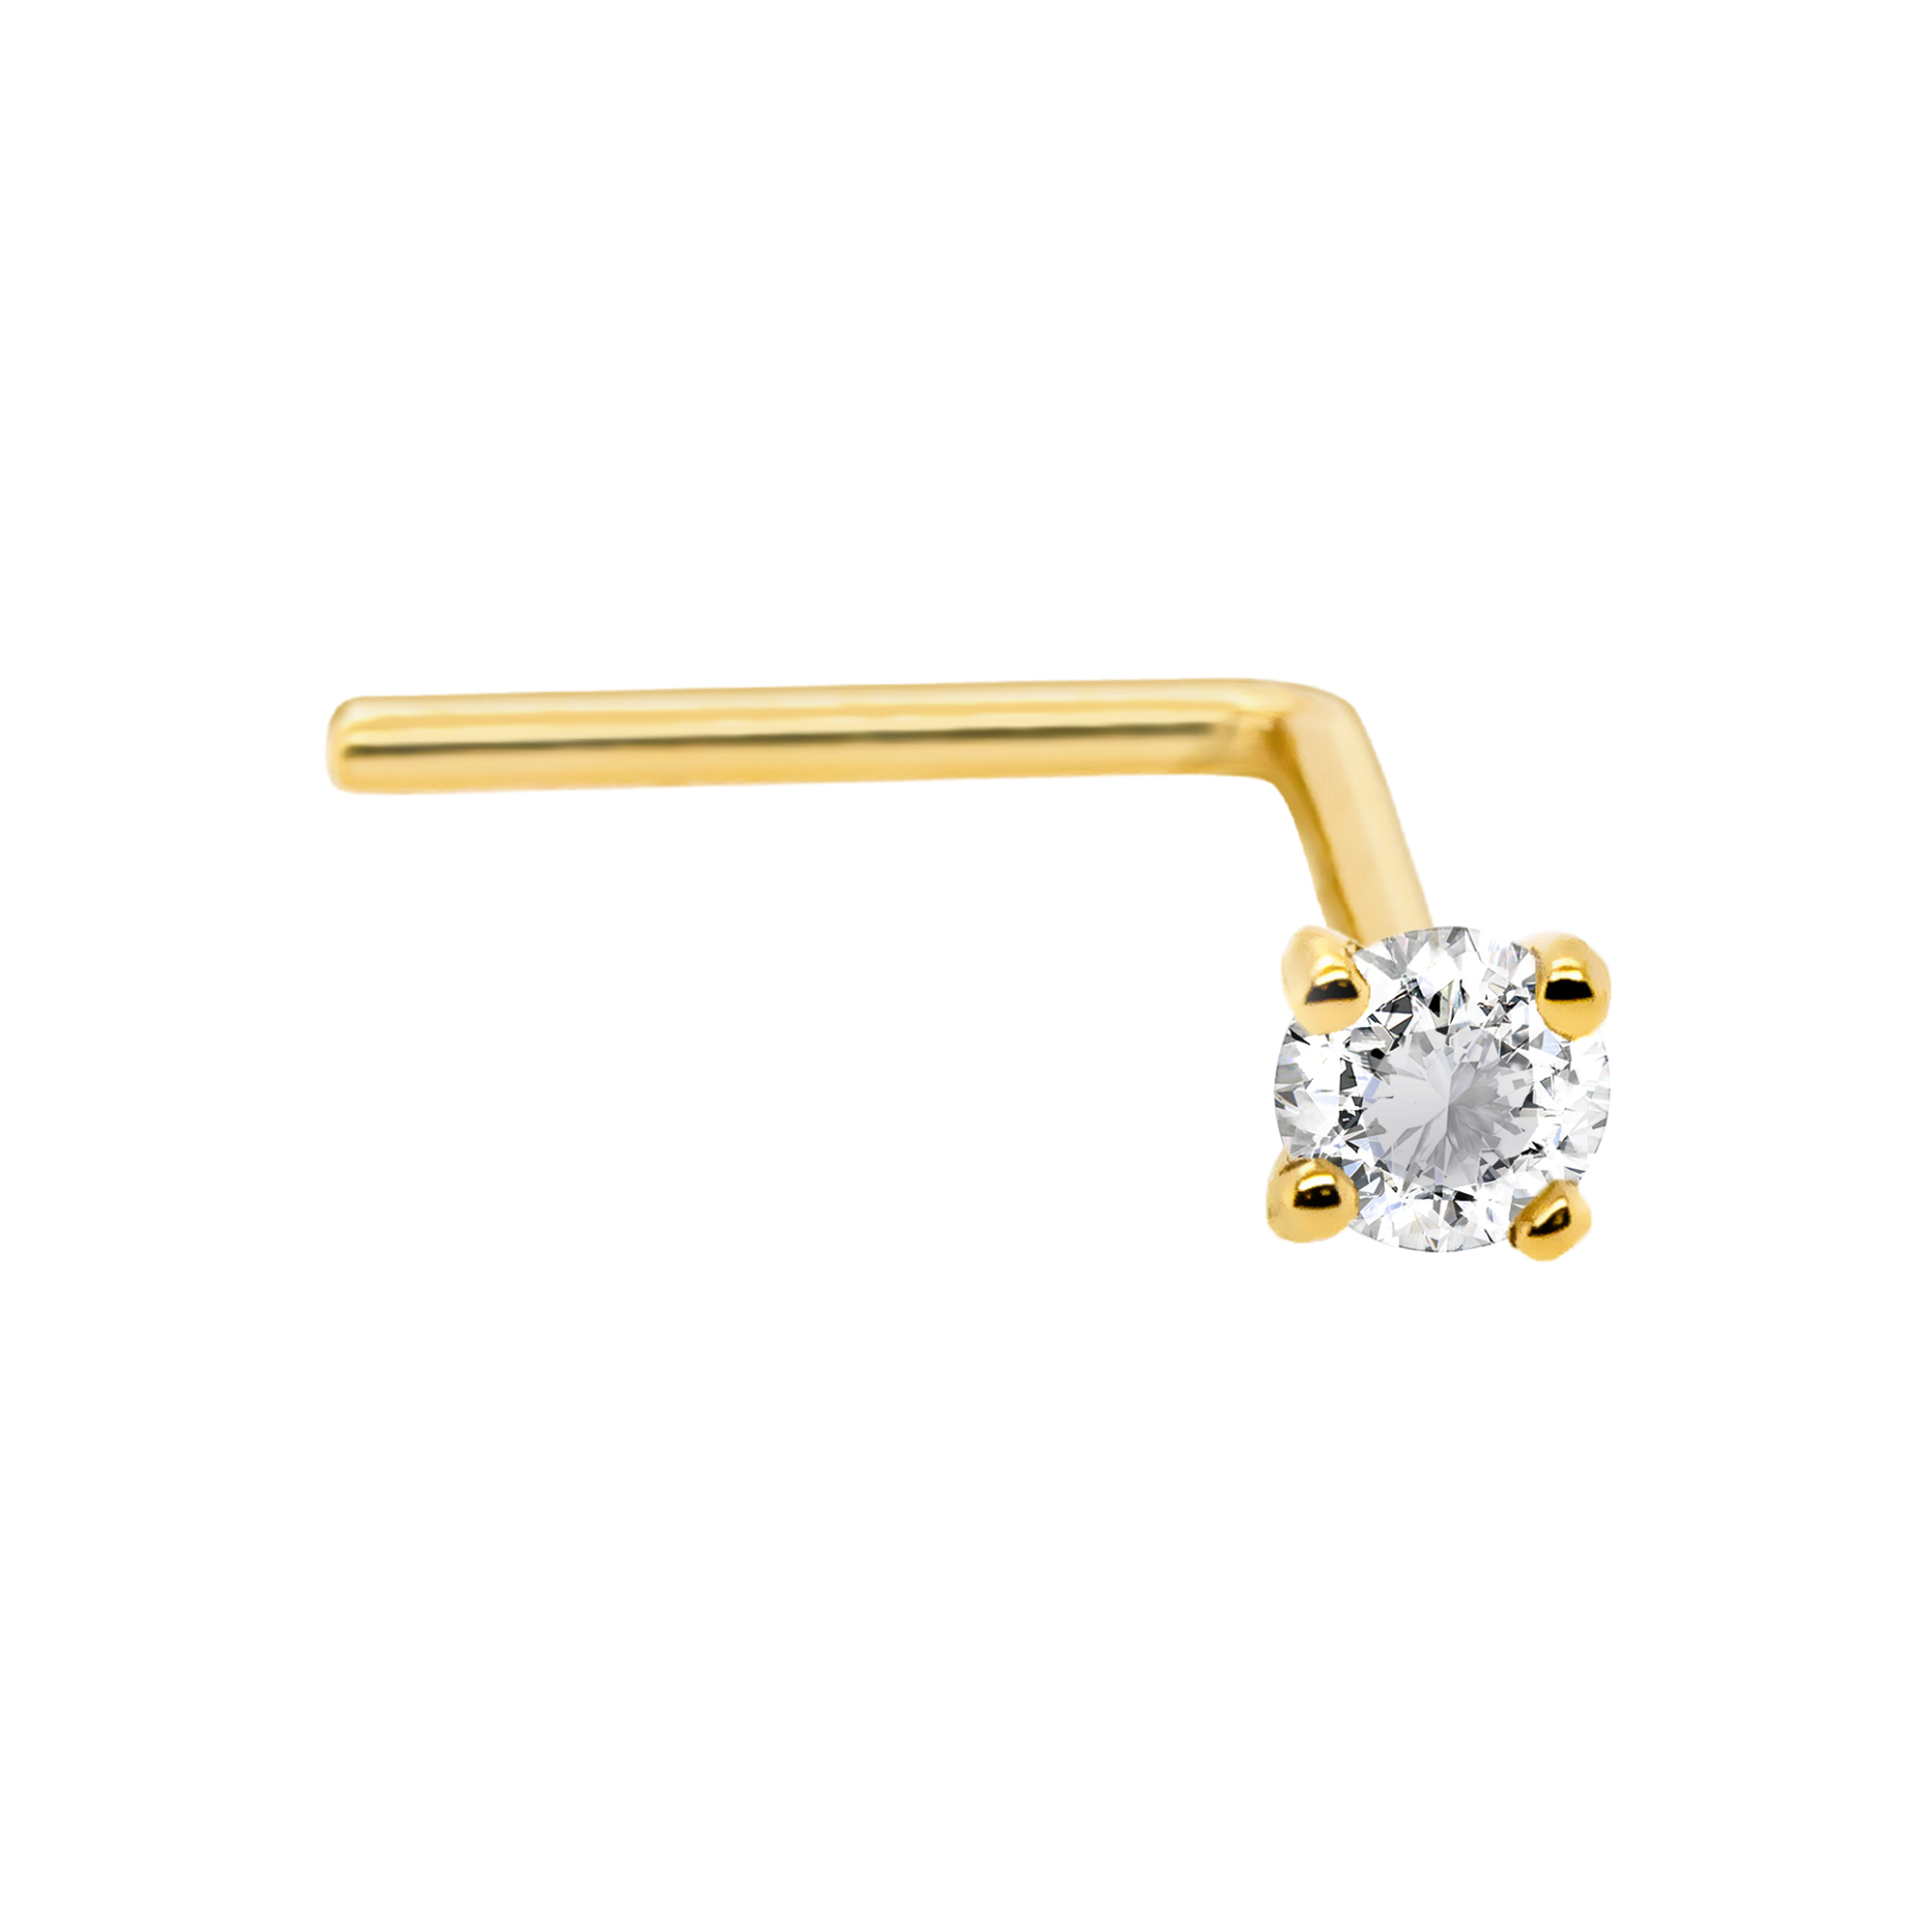 22G Solid 14Kt Gold L-Shape Nose Stud with real White Diamond Gemstone, 14kt Yellow Gold or 14kt White Gold Prong Setting - April Birthstone Nose Ring